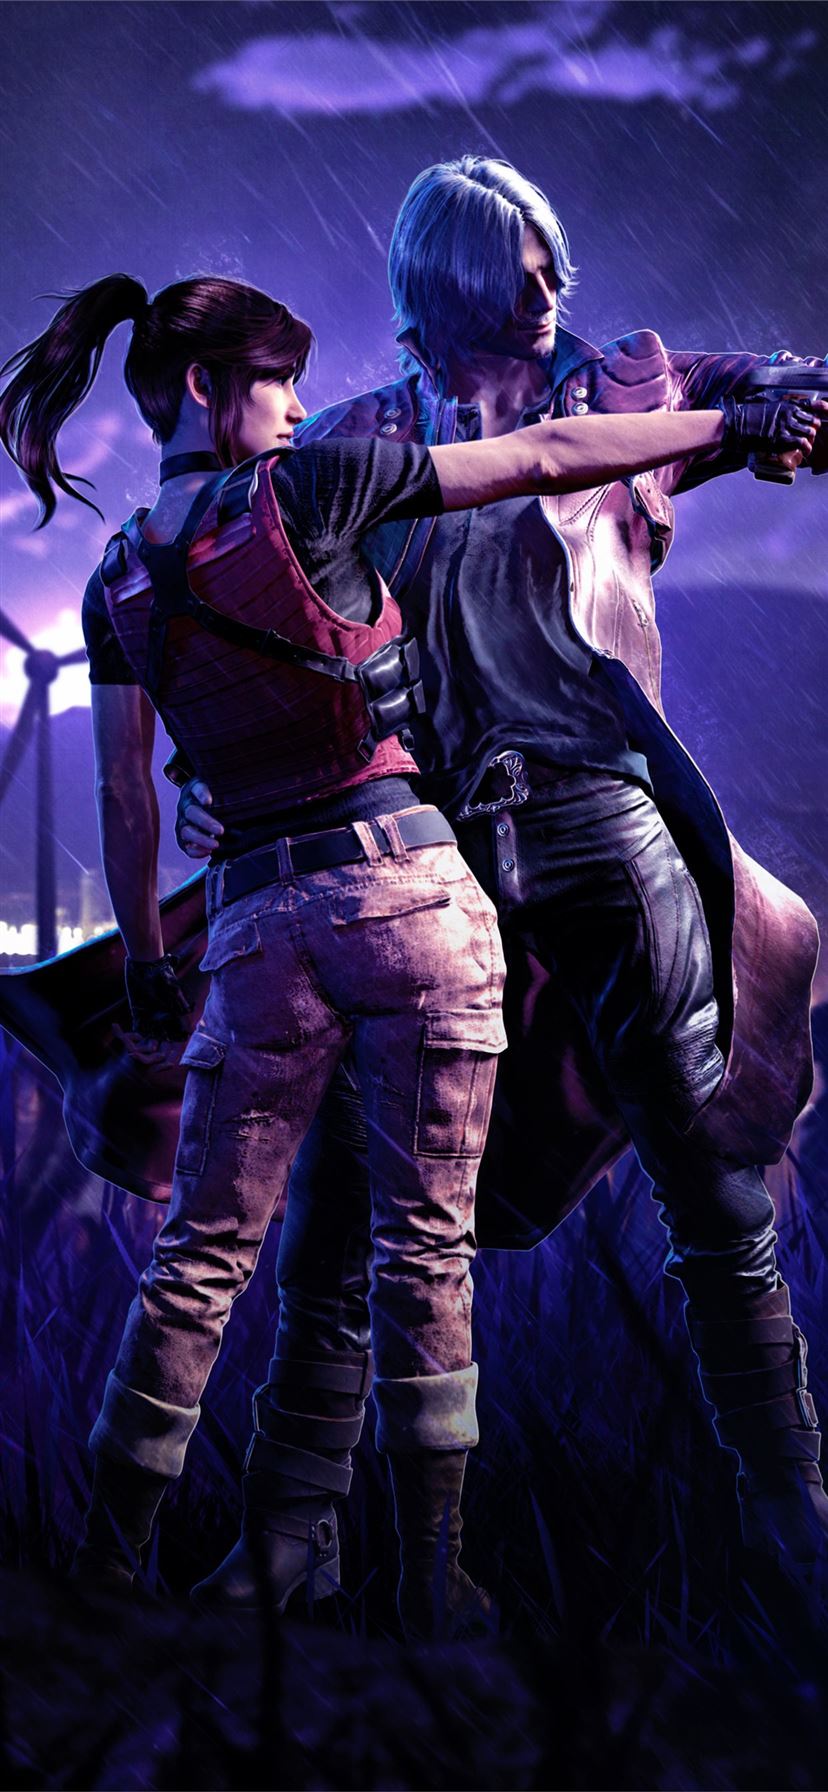 Wallpaper ID 441323  Video Game DmC Devil May Cry Phone Wallpaper   750x1334 free download